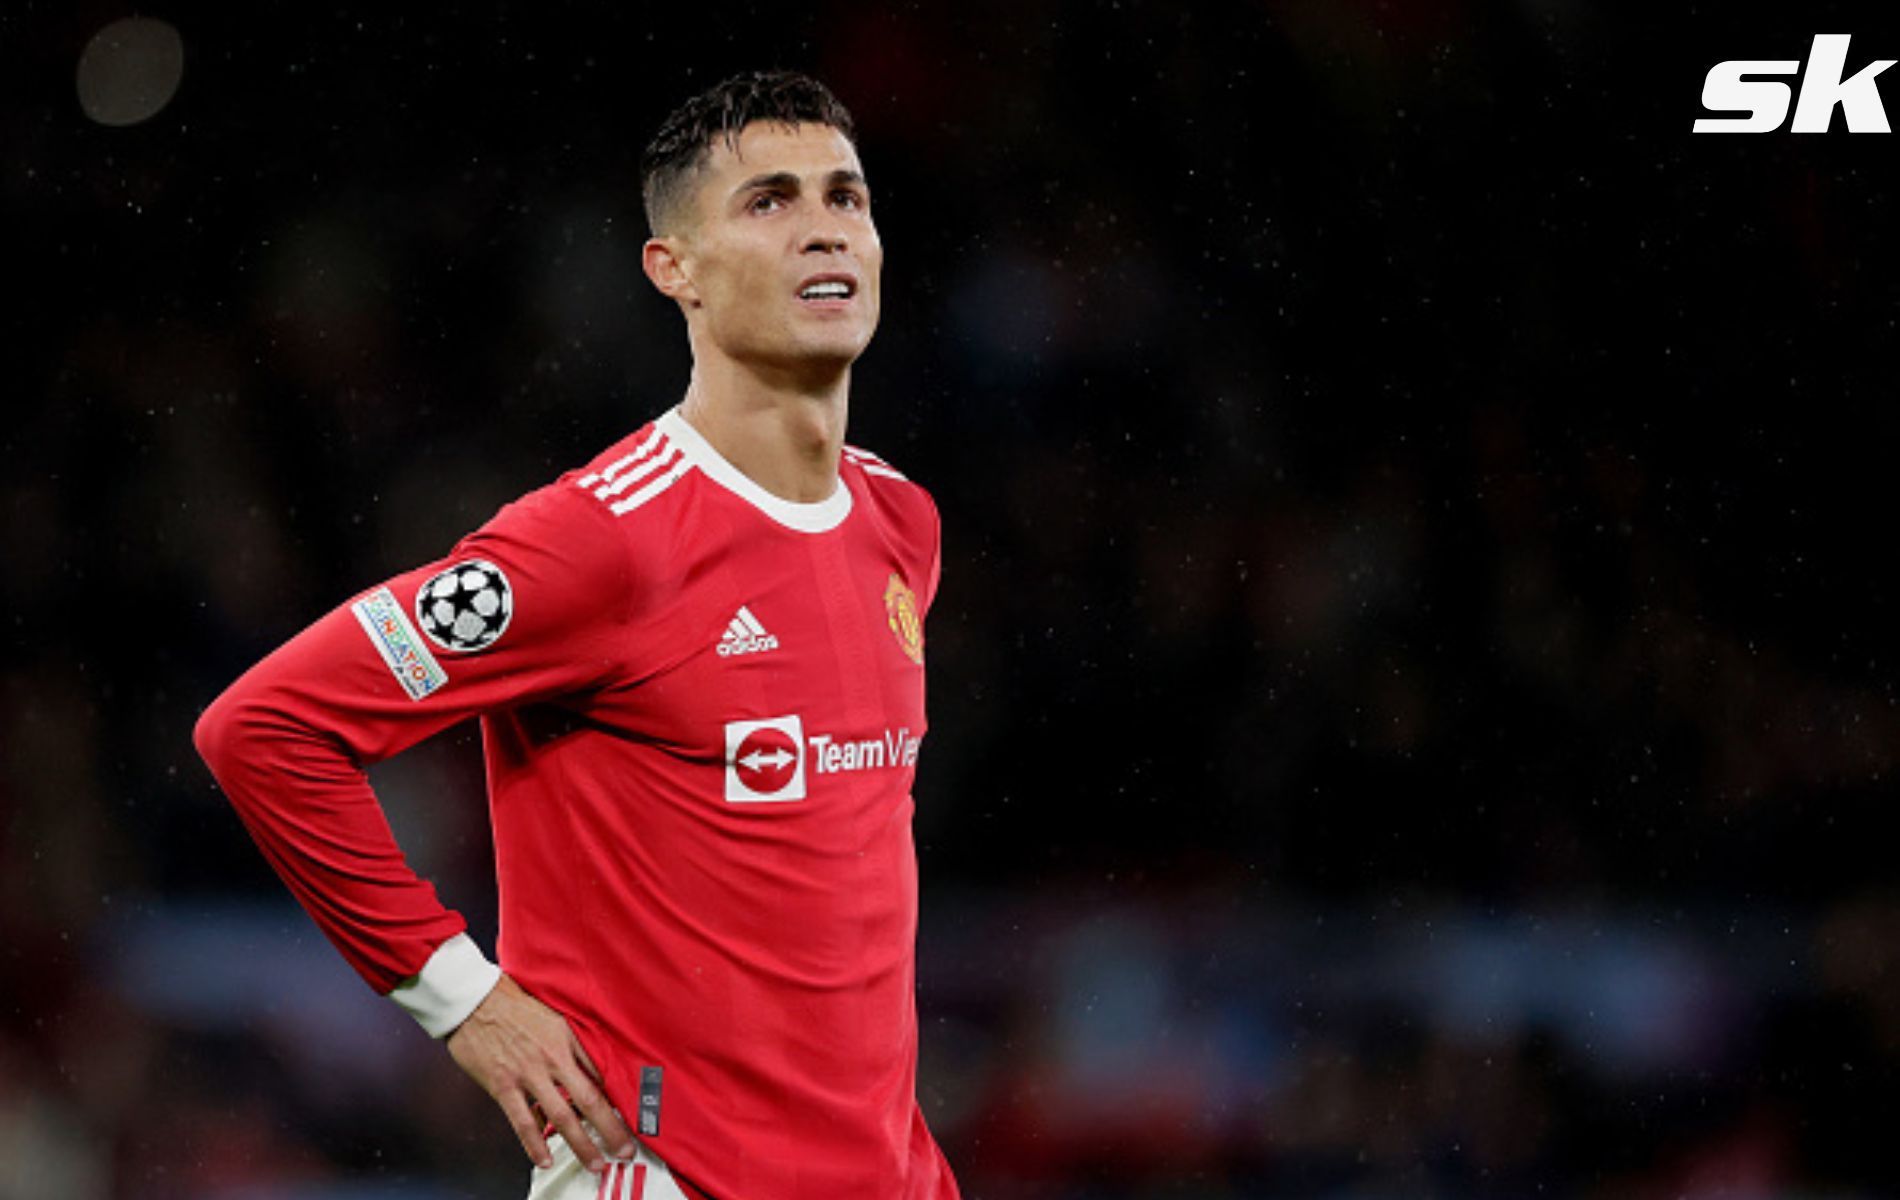 Could Cristiano Ronaldo see reduced playing time at Manchester United under Ralf Rangnick?